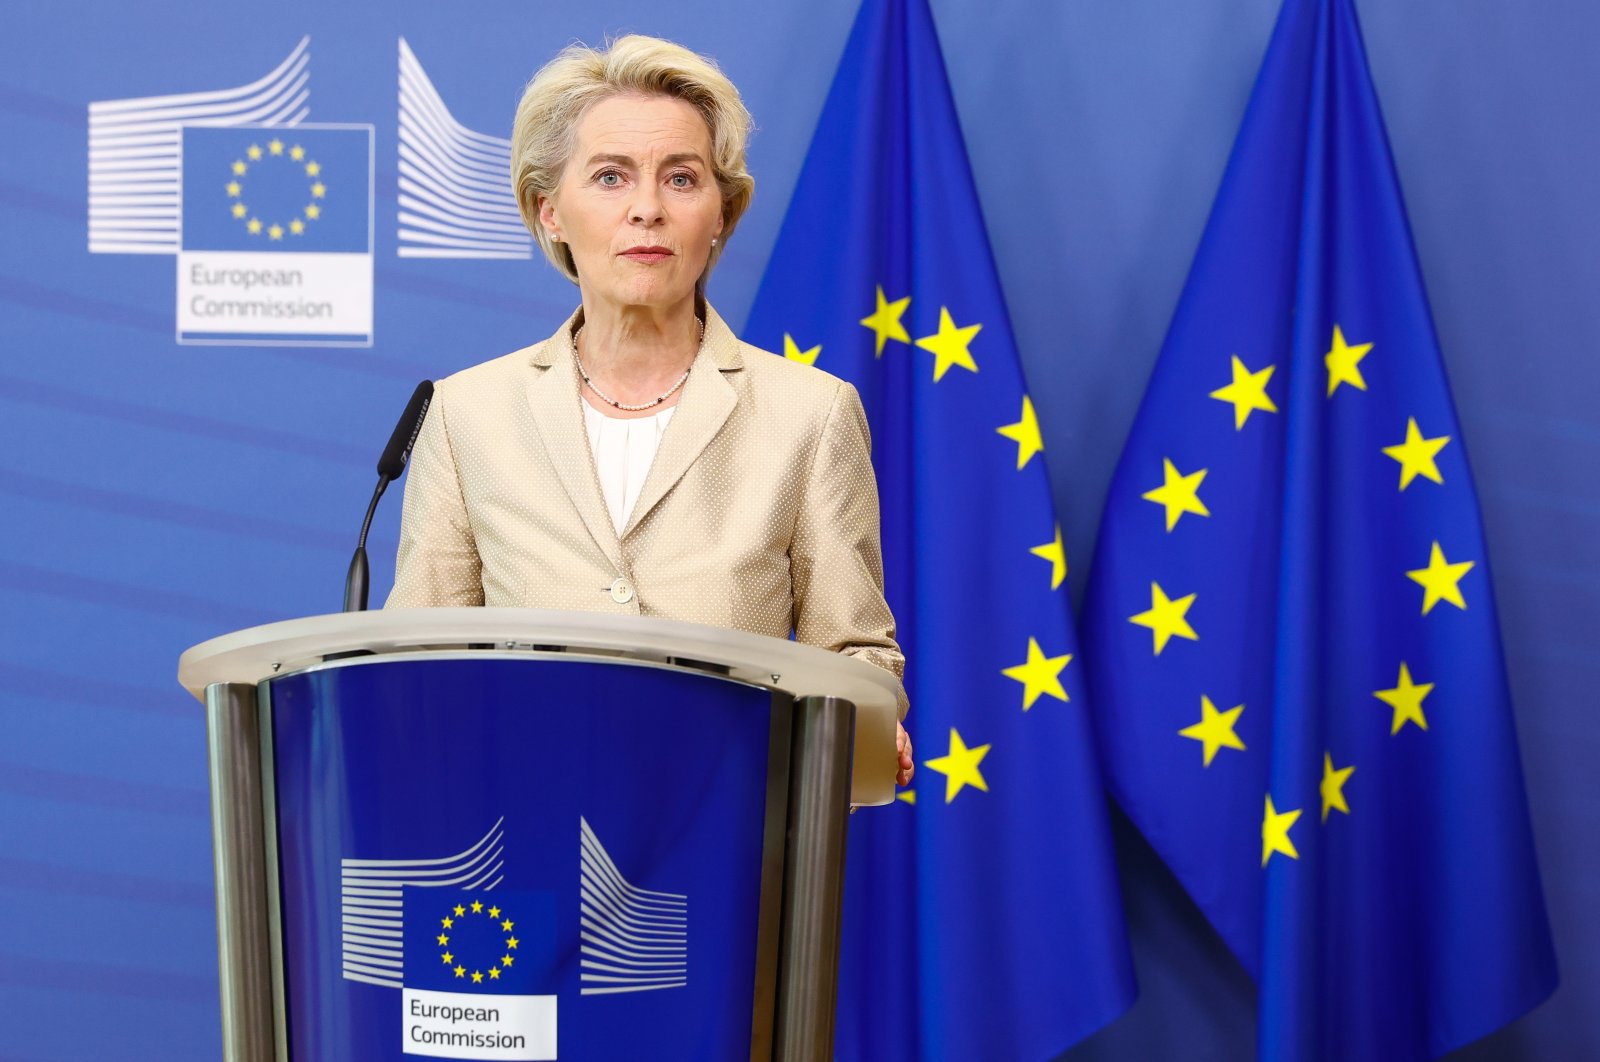 European Commission President Ursula von der Leyen holds a joint press statement to announce a new package of &#039;biting&#039; sanctions against Russia at the European Commission in Brussels, Belgium, Sept. 28, 2022. (EPA Photo)